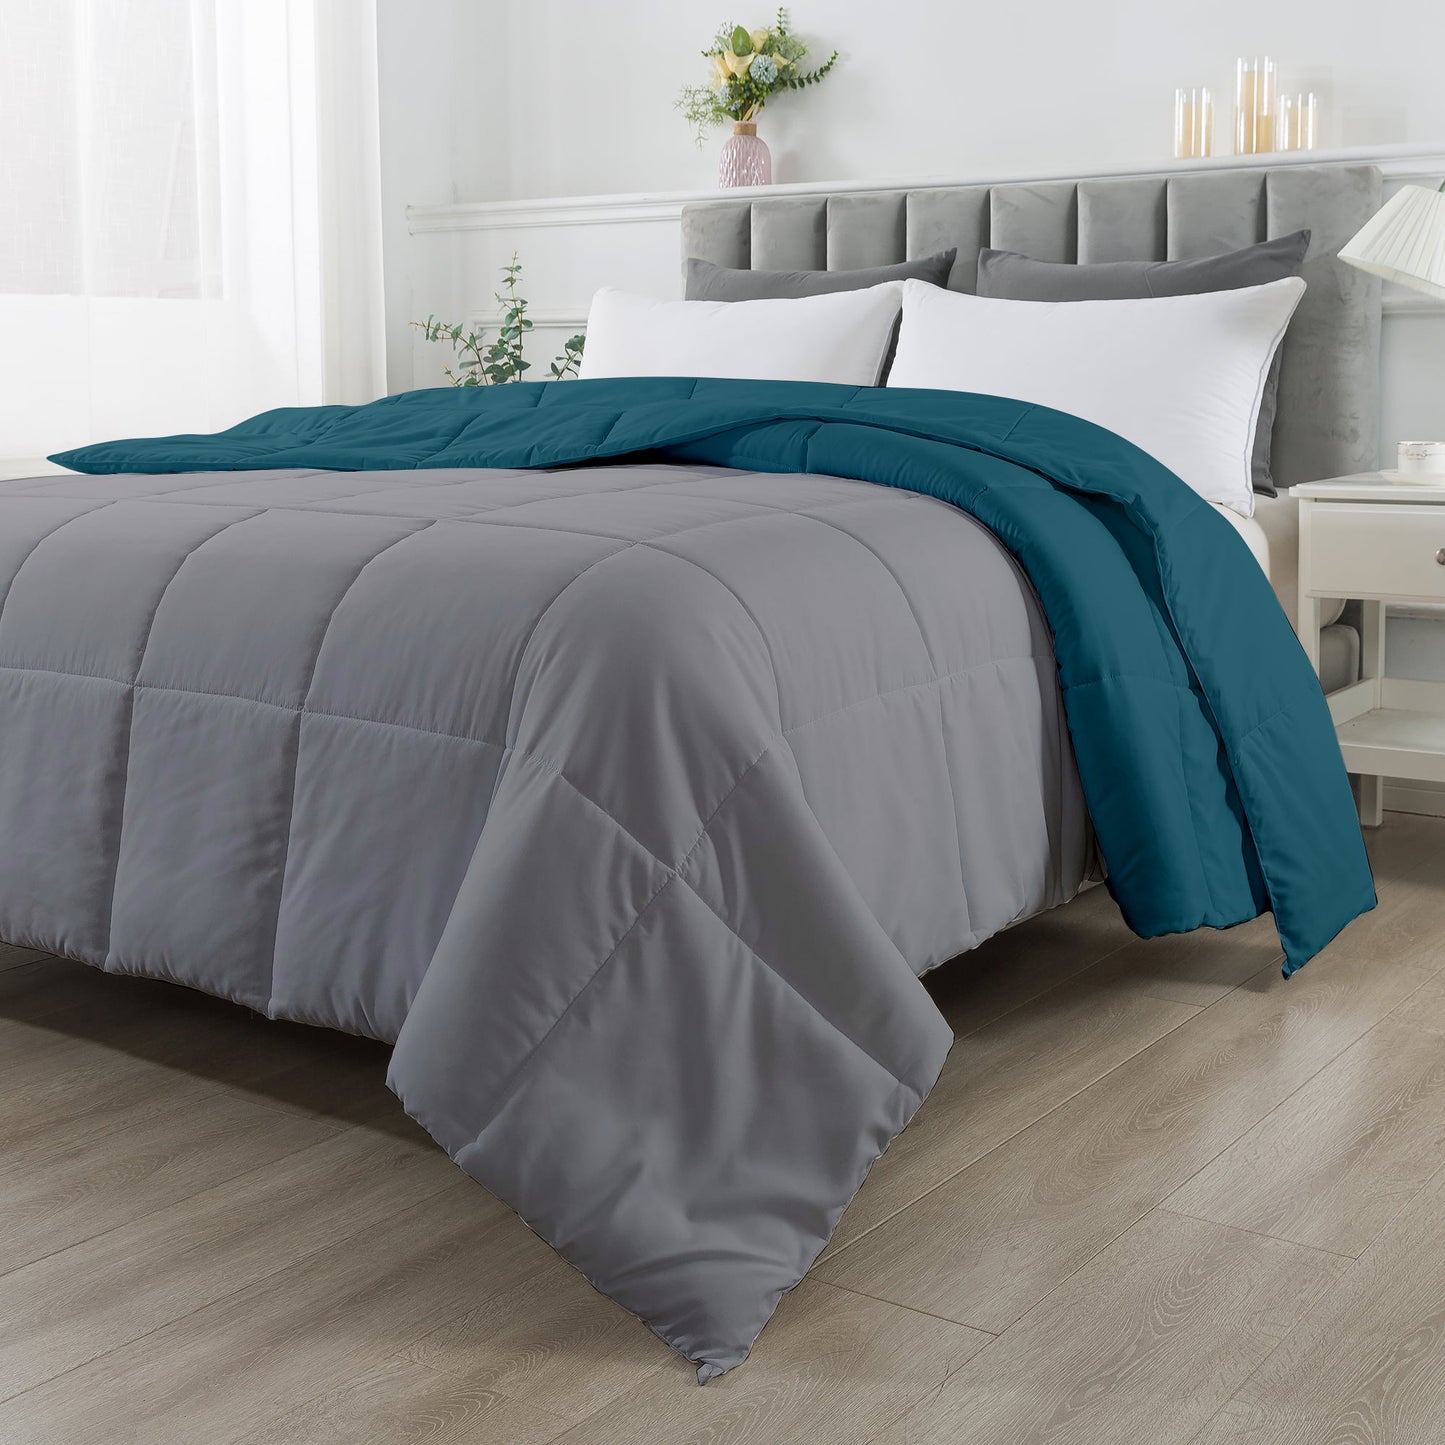 Razzai - 200 GSM Soft AC Comforter Hotel Quality-Down Alternative Reversible Comforter - All Season |AC Comforter/Blanket/Quilt/Rajai Double Bed|Silver/Teal